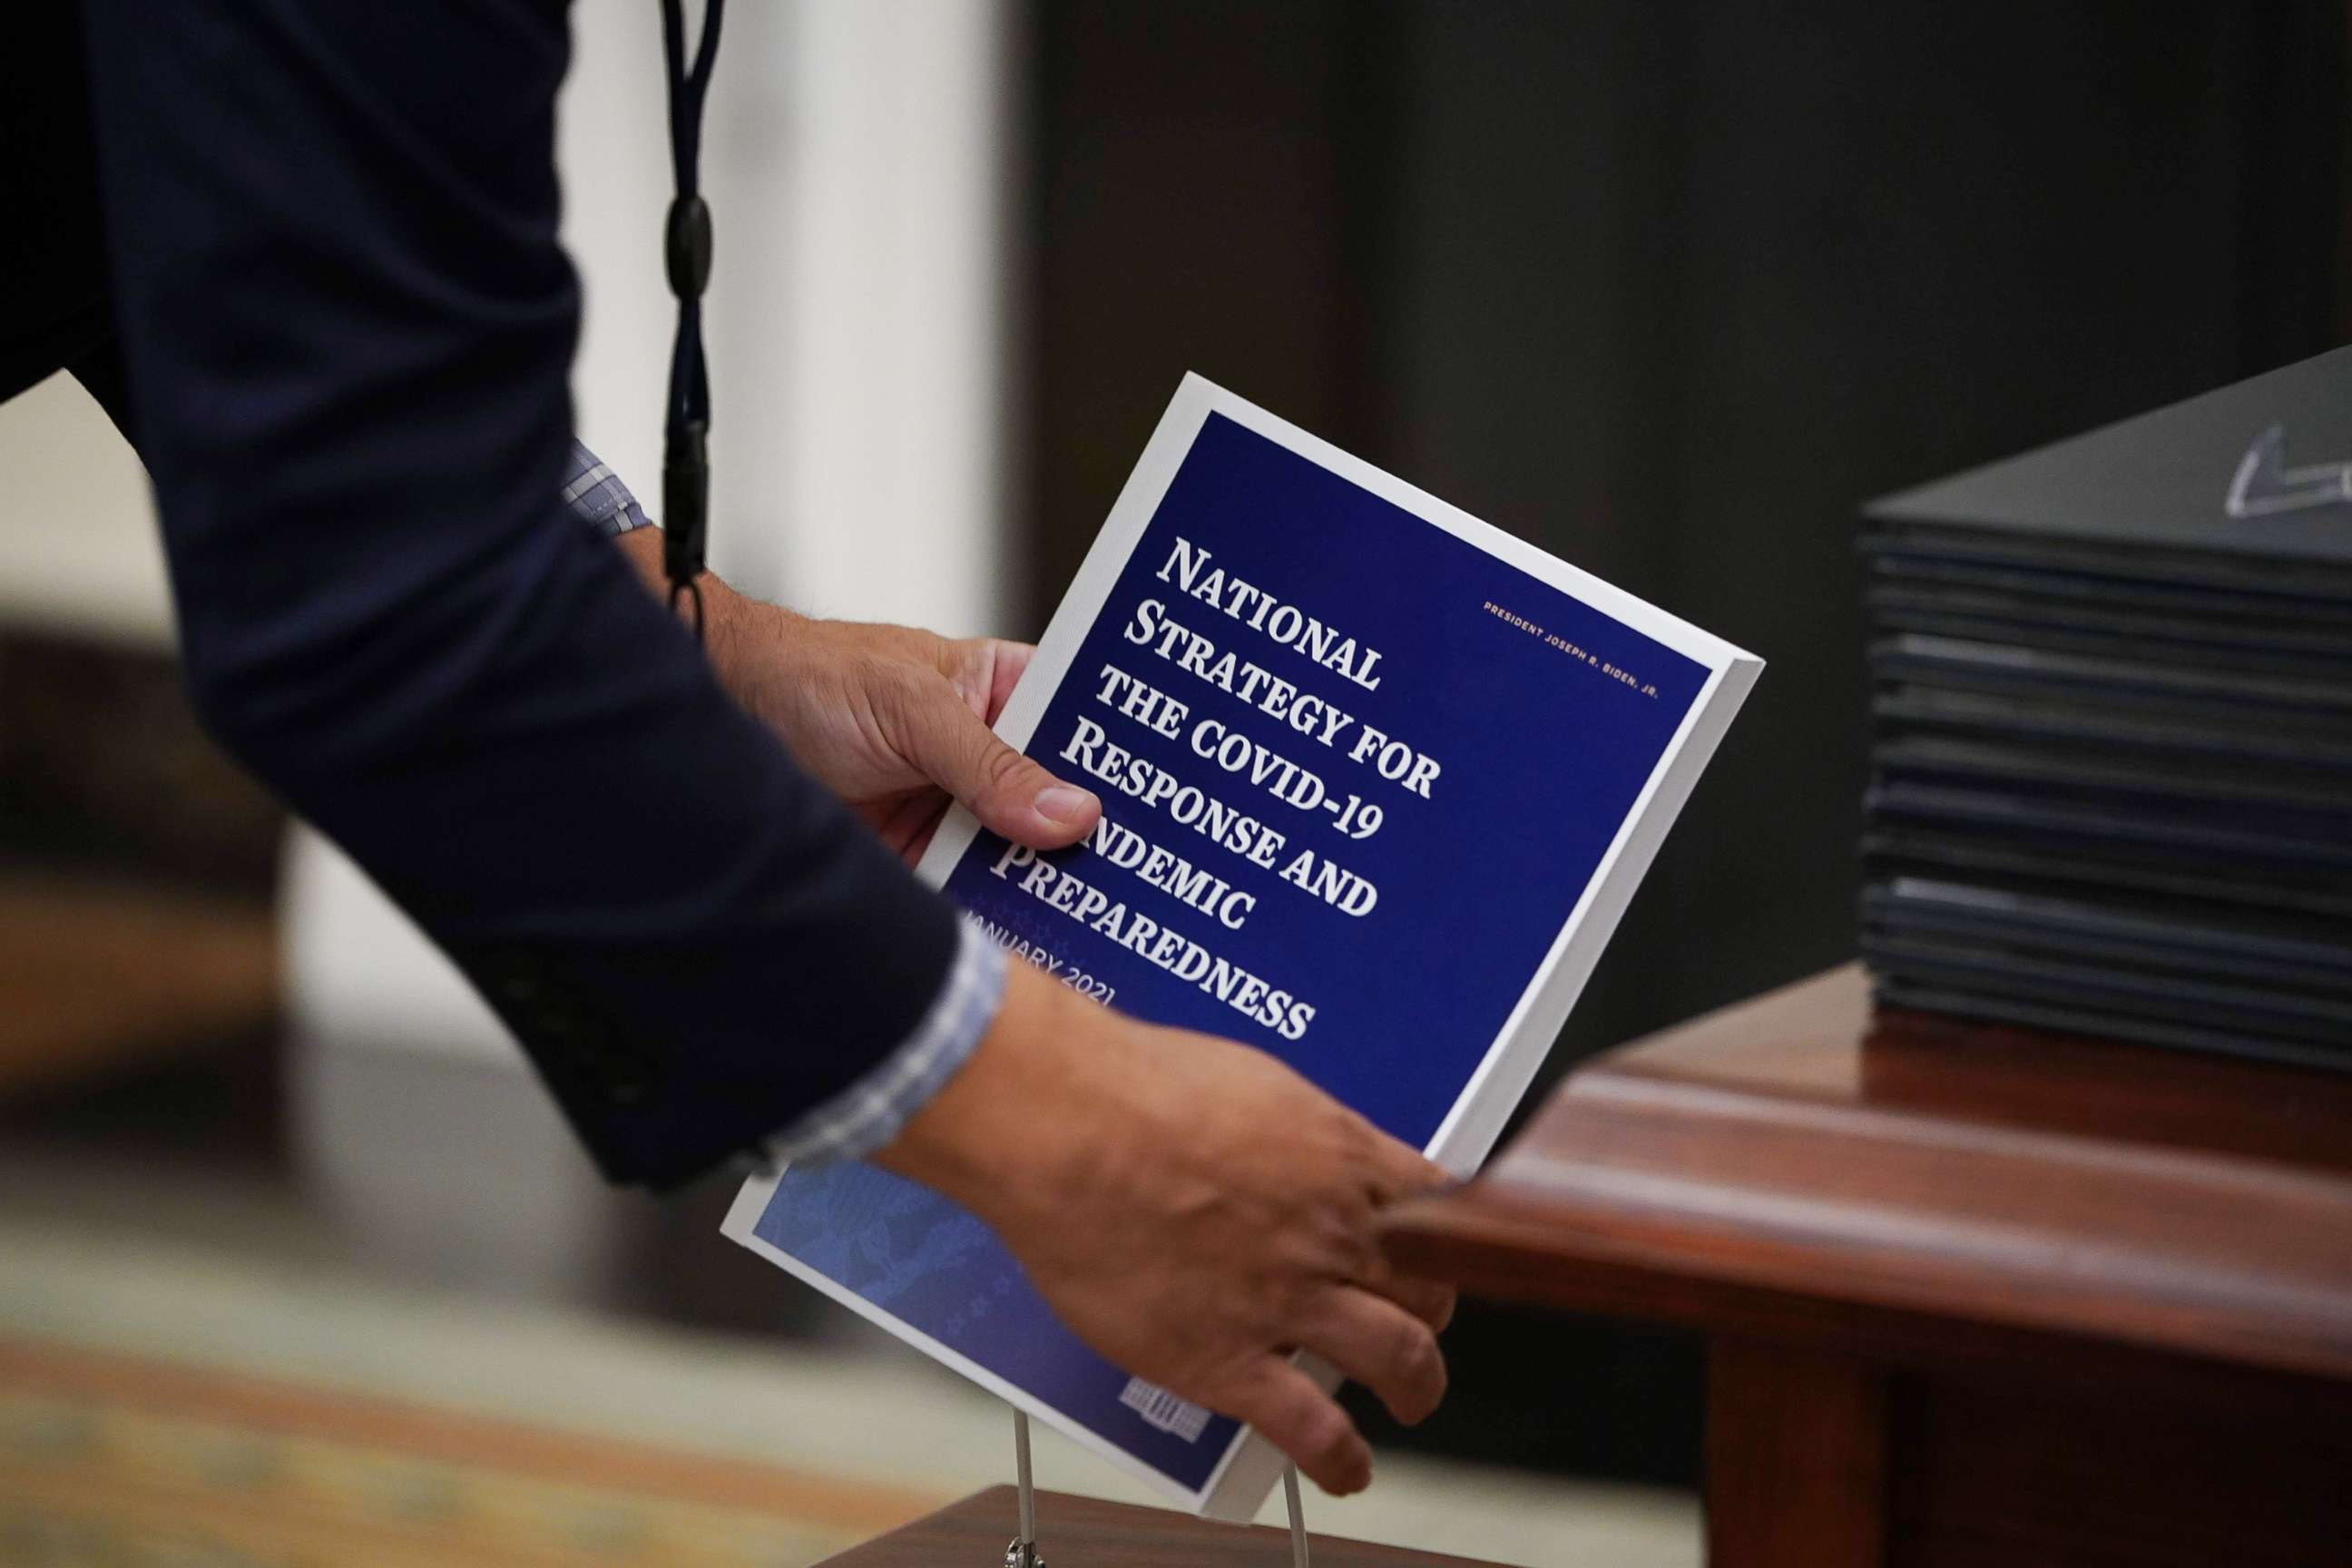 PHOTO: An aide collects copies of the National Strategy for COVID-19 before President Joe Biden speaks in the State Dining Room of the White House in Washington, Jan. 21, 2021.